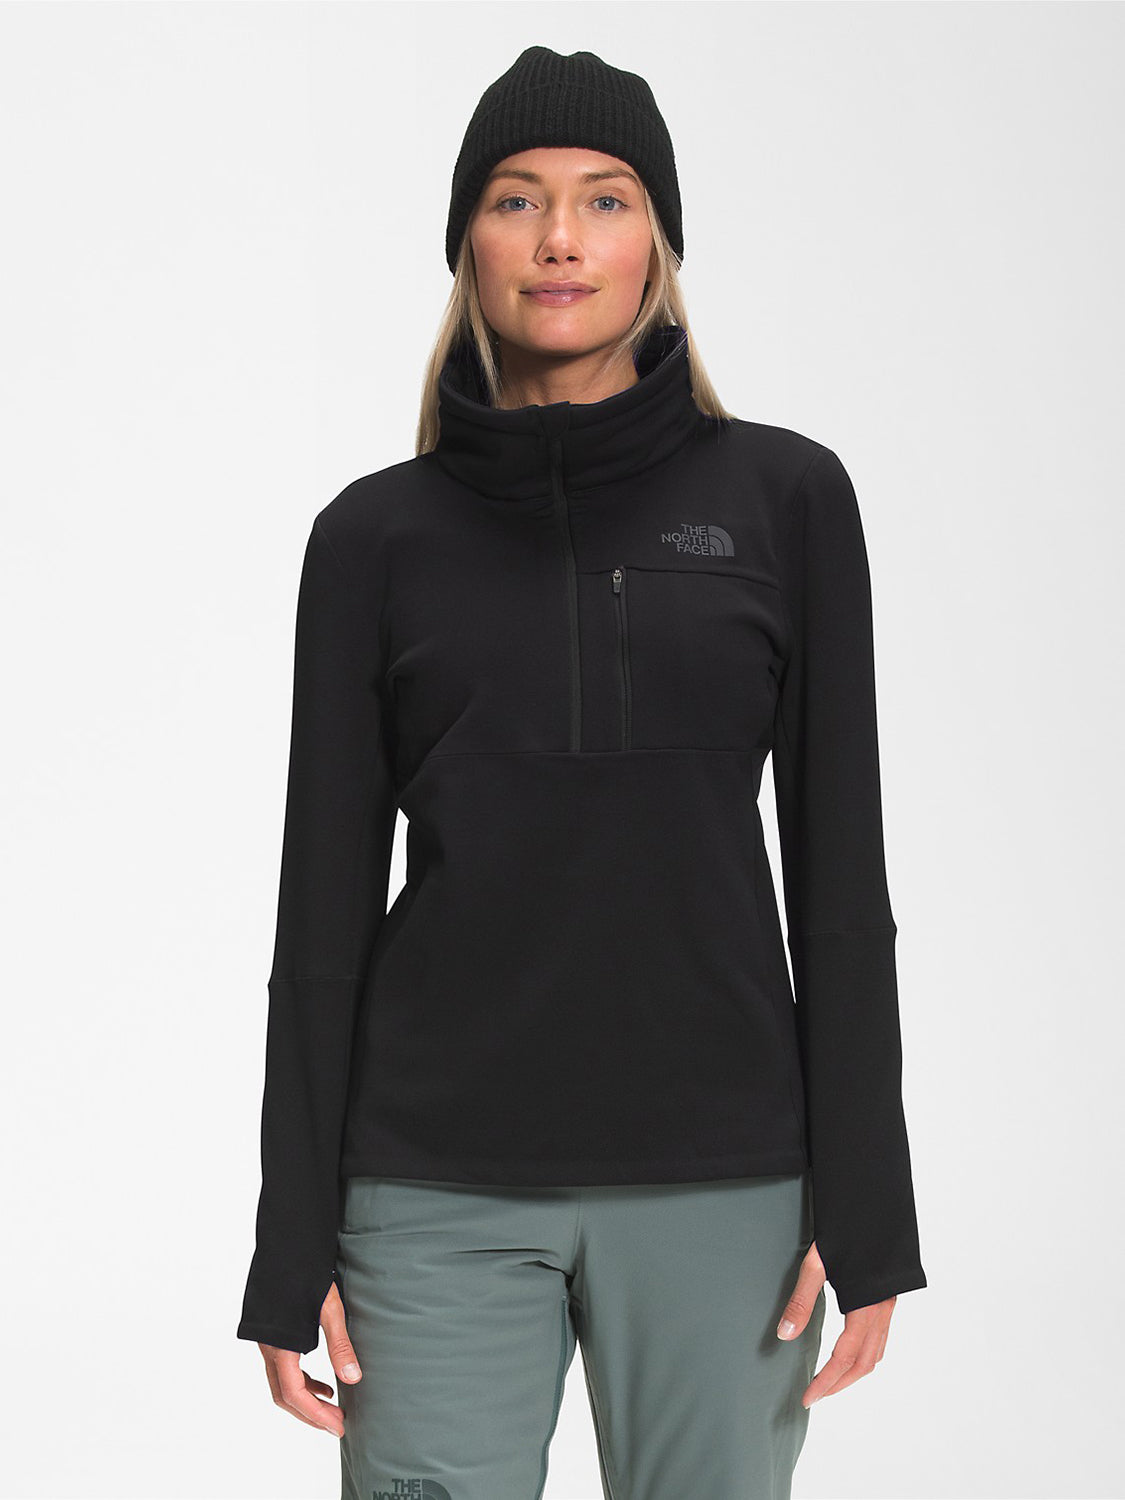 The North Face Womens TAGEN 1/4 ZIP FLEECE Pullover